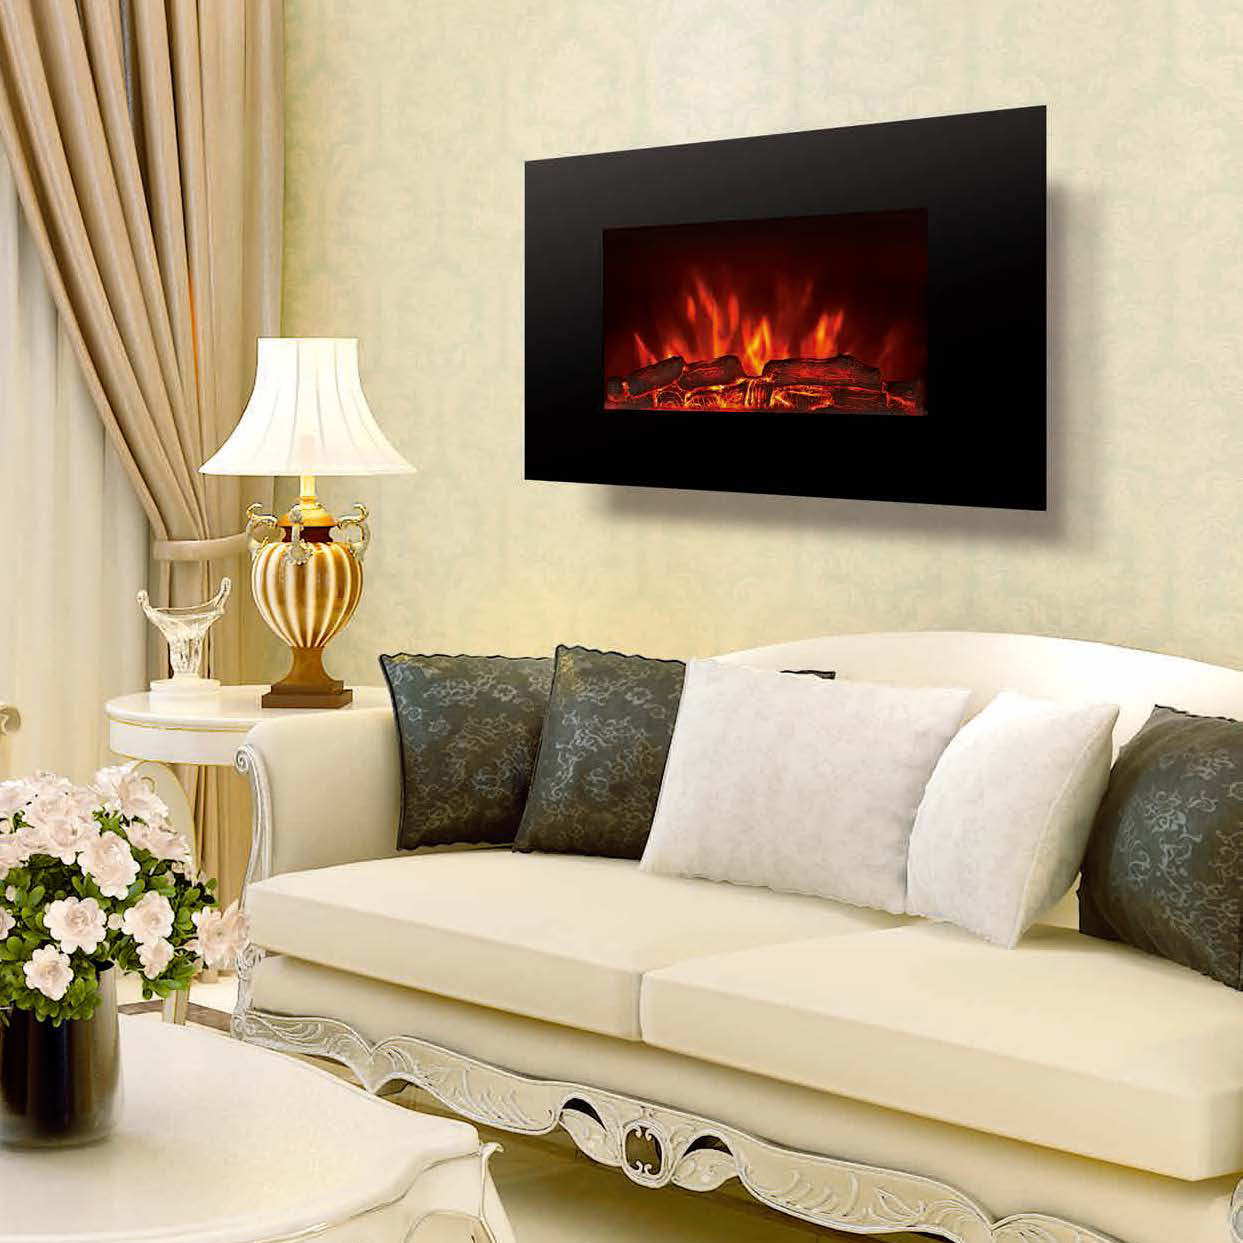 Wall Units with Fireplaces Lovely Fire Flame Flat Tempered Glass Wall Mounted Electric